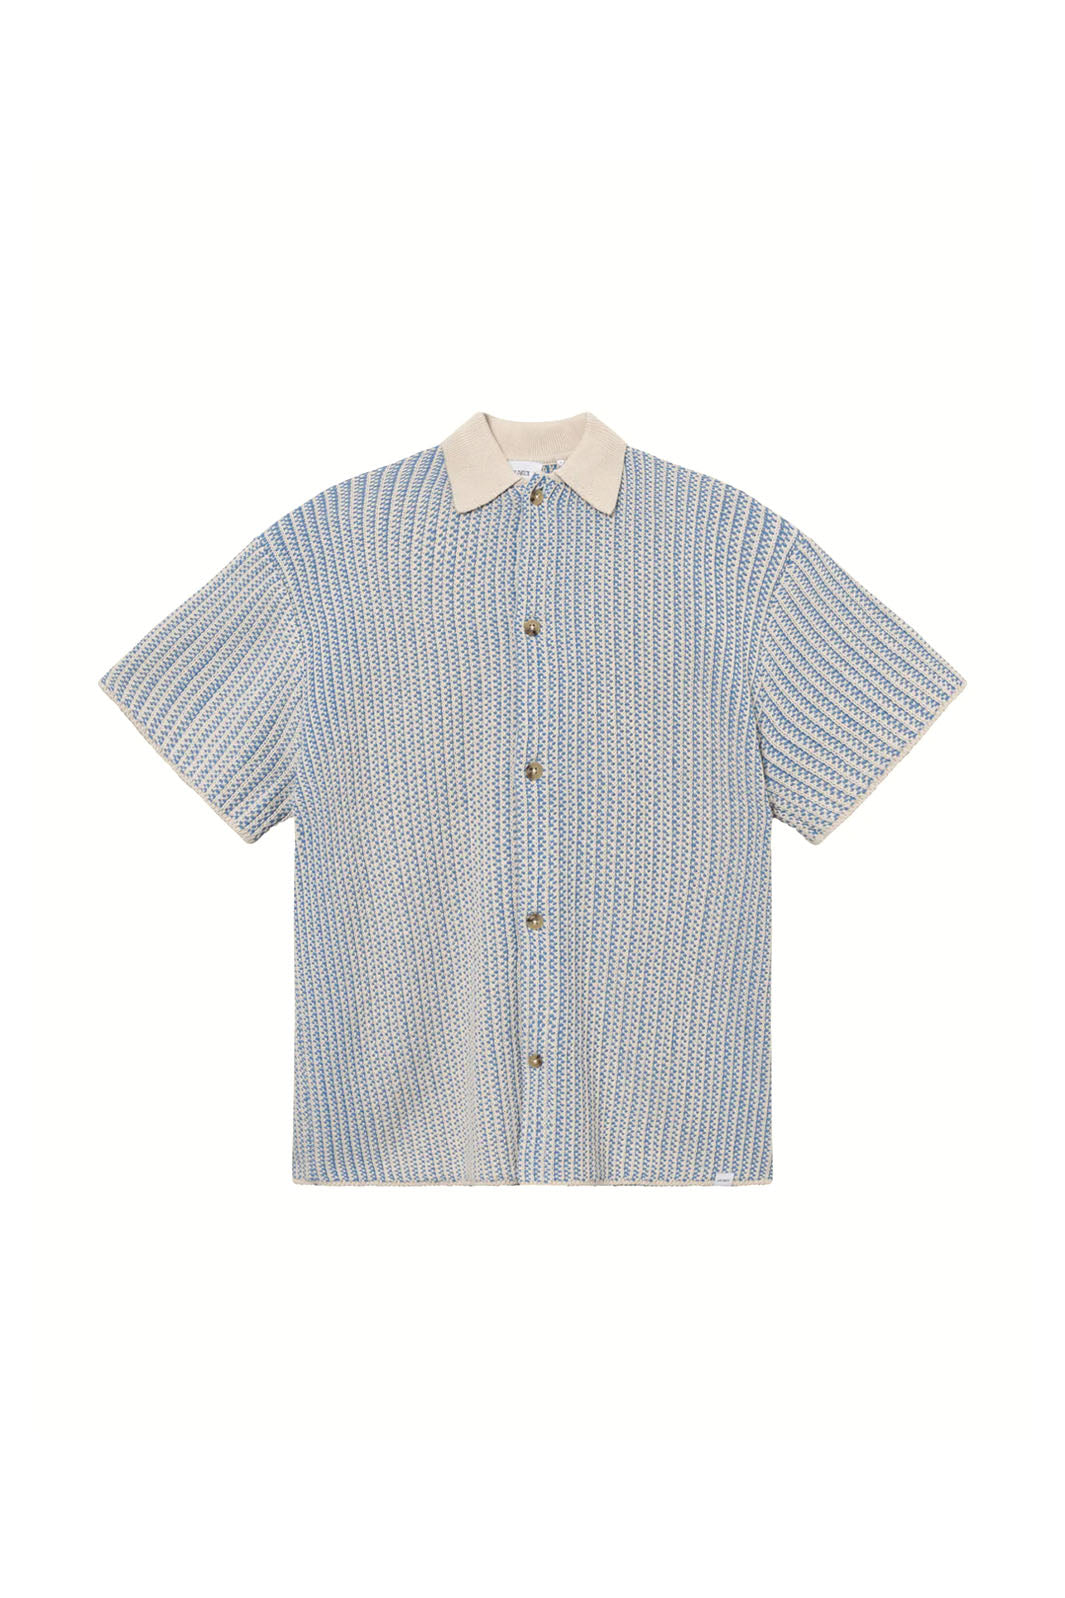 Easton Knitted Button-Up Shirt - Washed Denim Blue/ Ivory